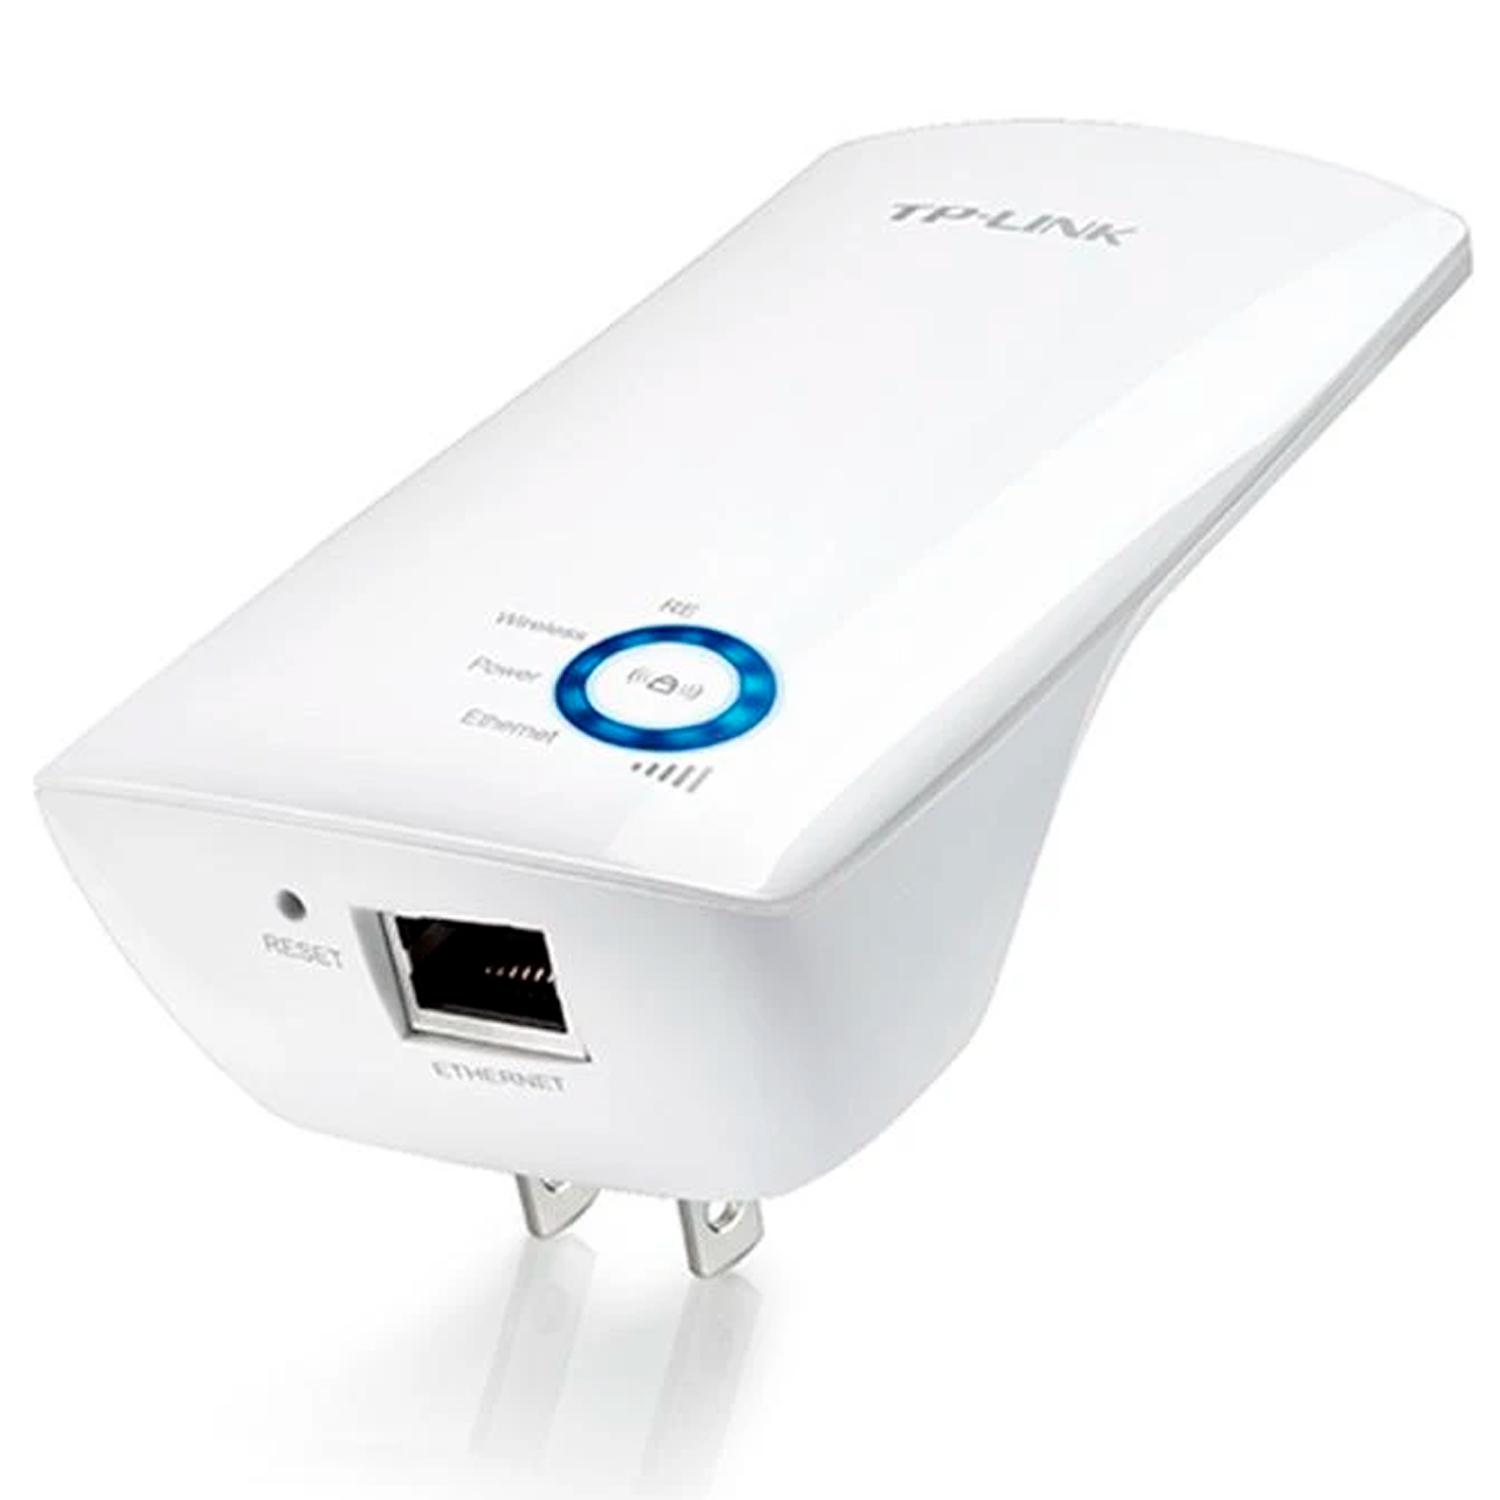 Repetidor Wifi TP-LINK TL-WA850RE inalambrico 2.4Ghz hasta 15 metros300Mbps